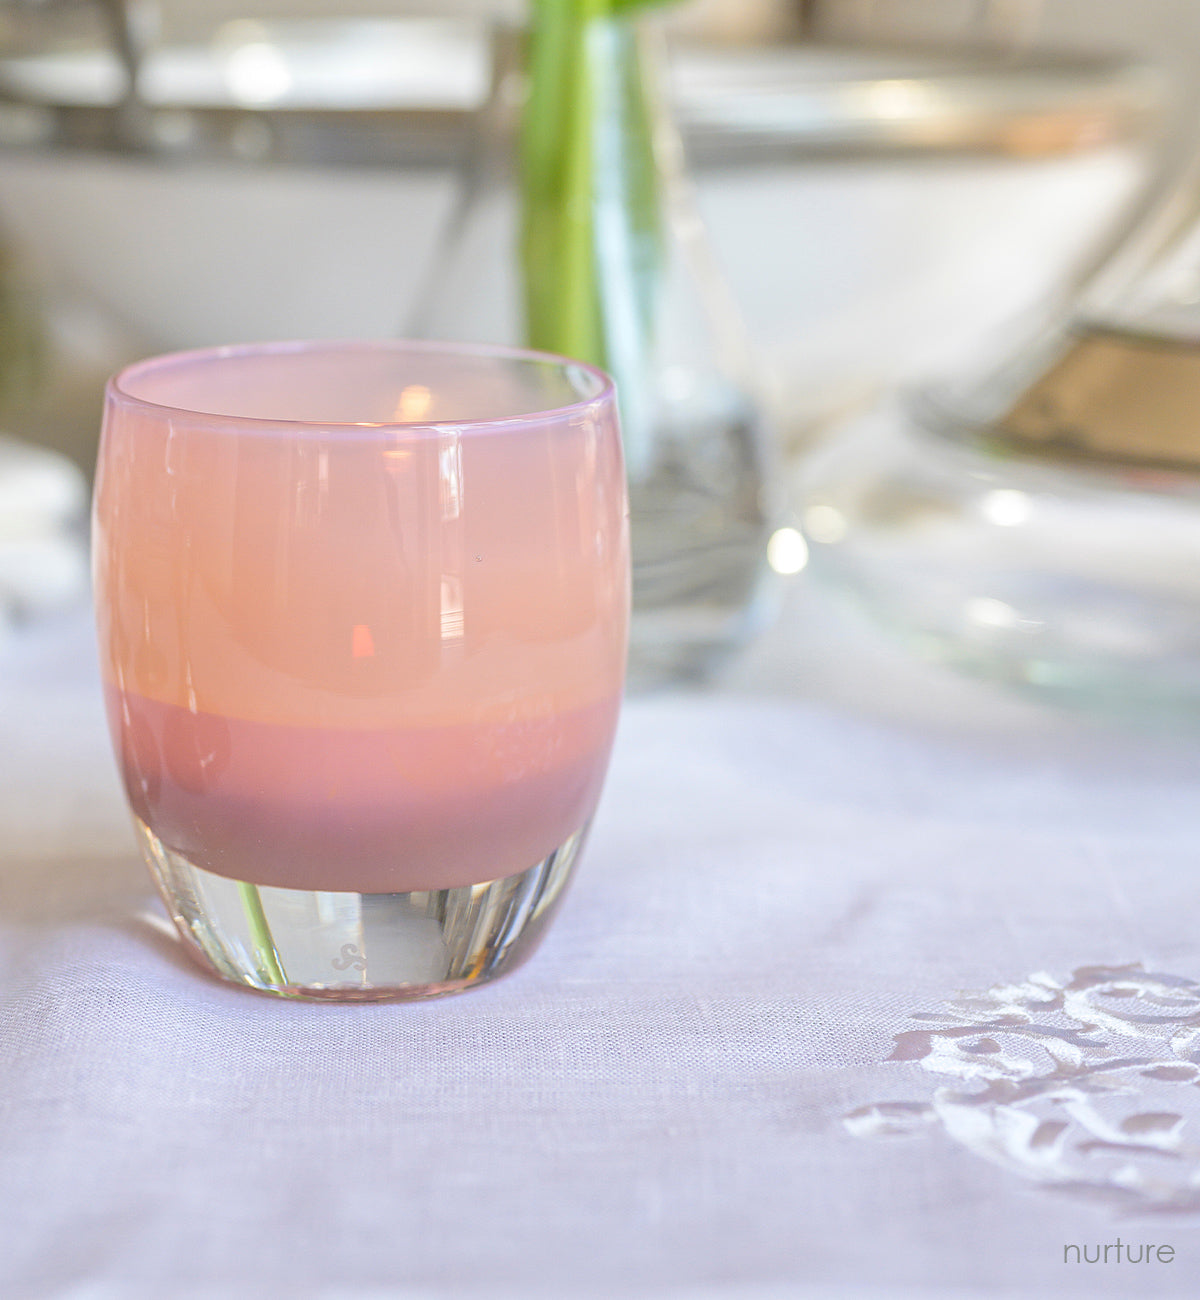 nurture, peachy glowing hand-blown glass votive candle holder, lit on a white tablecloth.